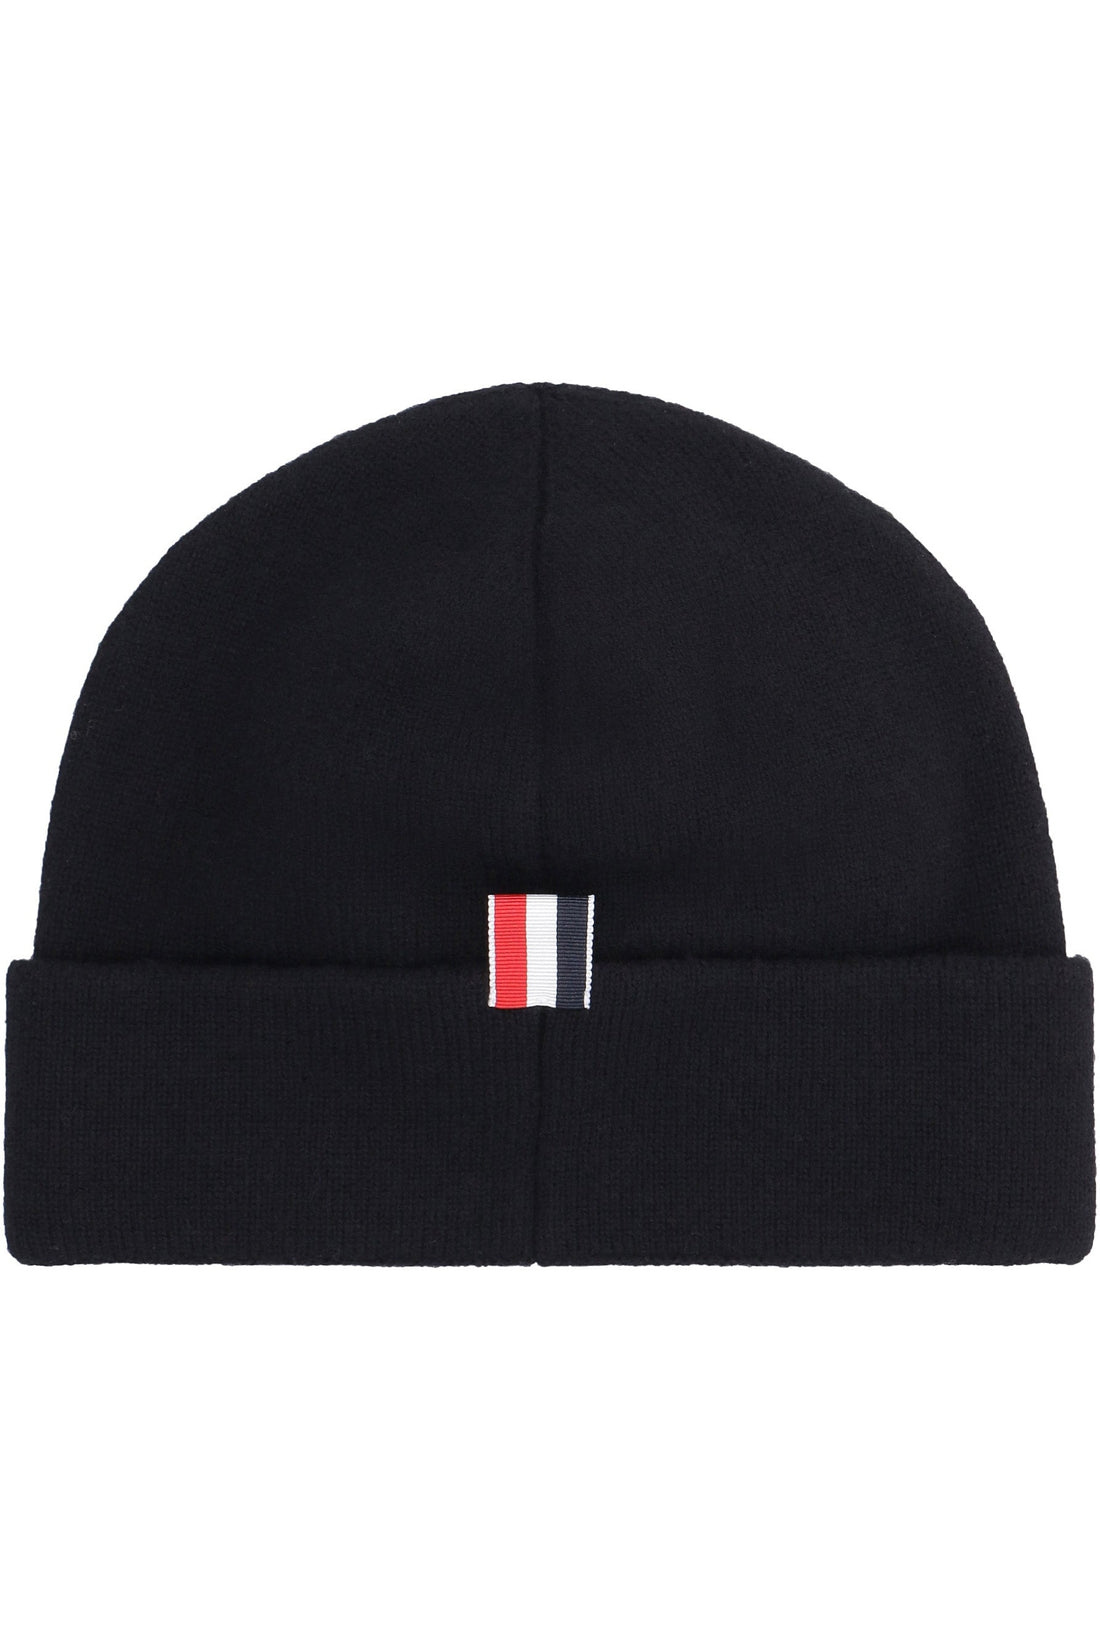 Thom Browne-OUTLET-SALE-Knitted wool beanie hat-ARCHIVIST